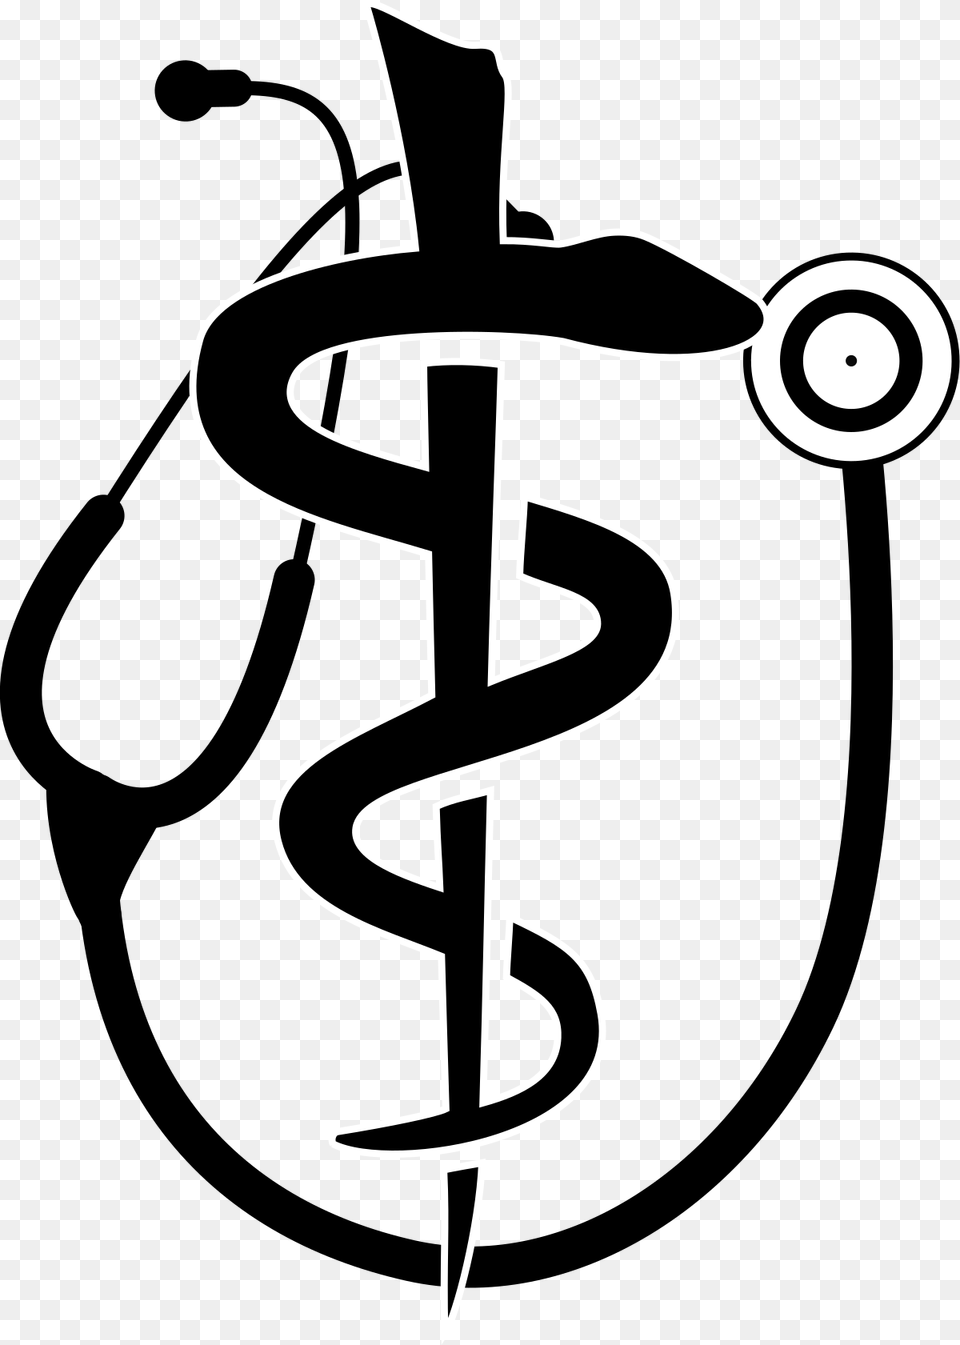 Transparent Stethoscope Vector Rod Of Asclepius Logo, Spiral, Stencil, Cross, Symbol Png